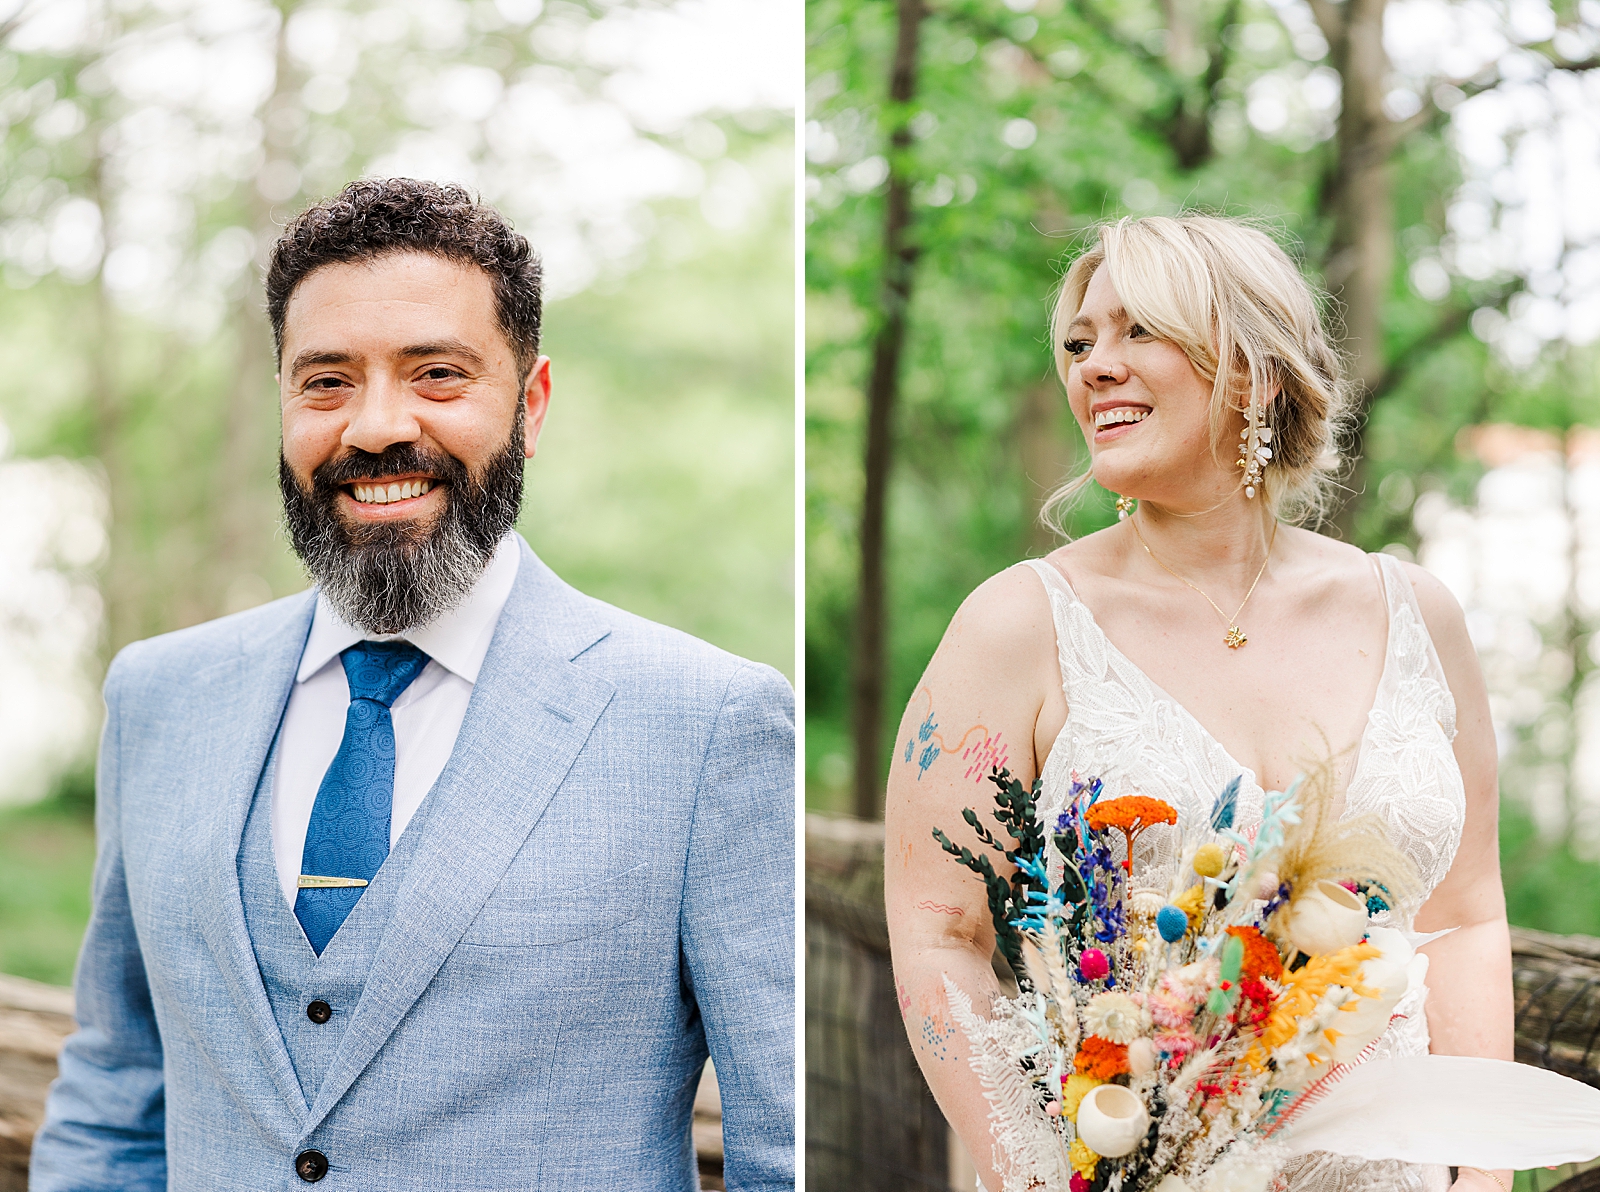 Left: Upper body shot of Eliseo smiling for the camera.
Right: Upper body shot of MK with her bouquet as she stares off into the distance. 